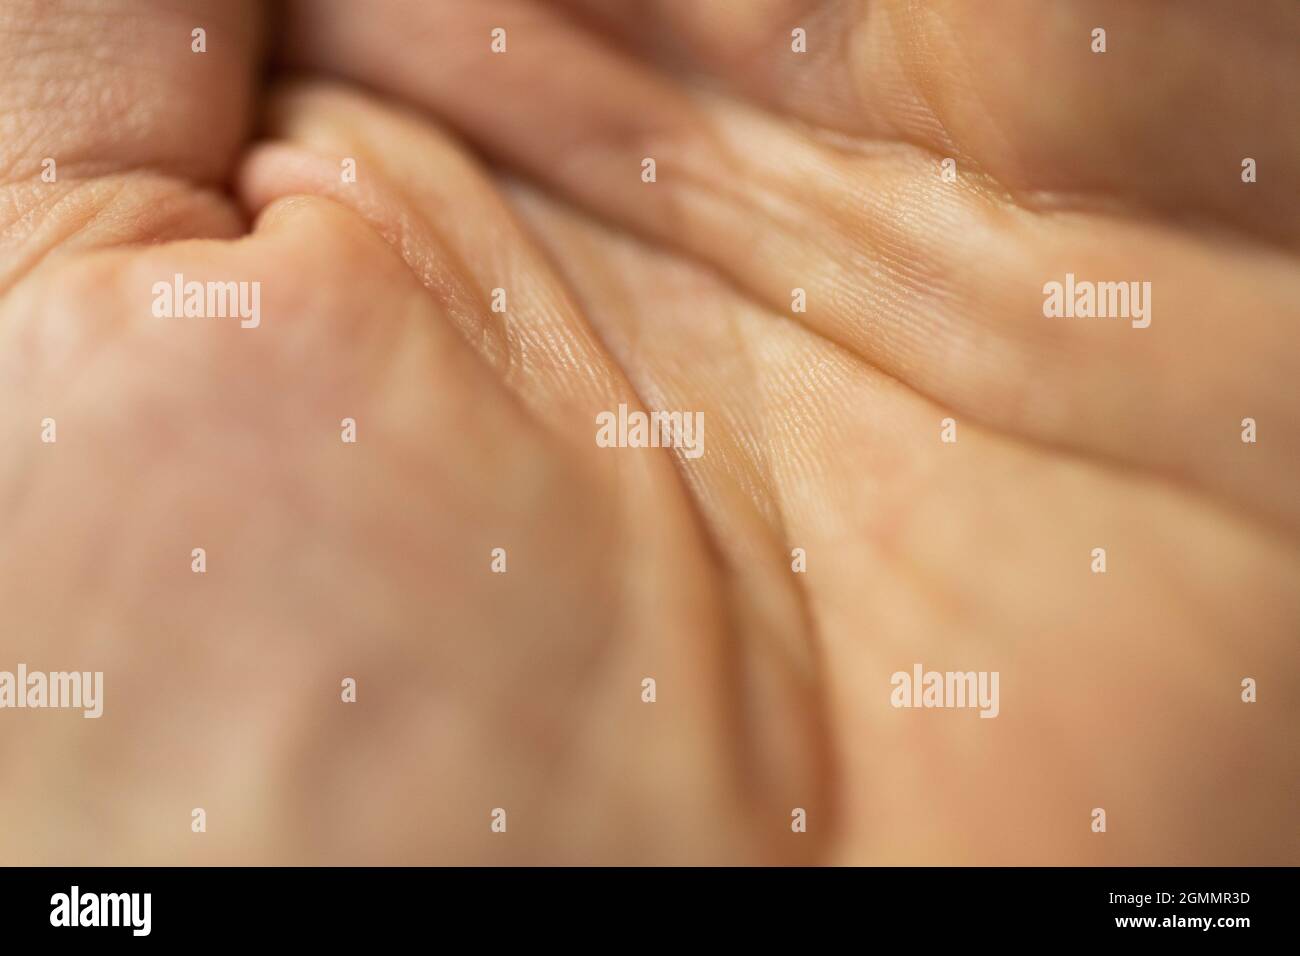 Close up lines on hand Stock Photo